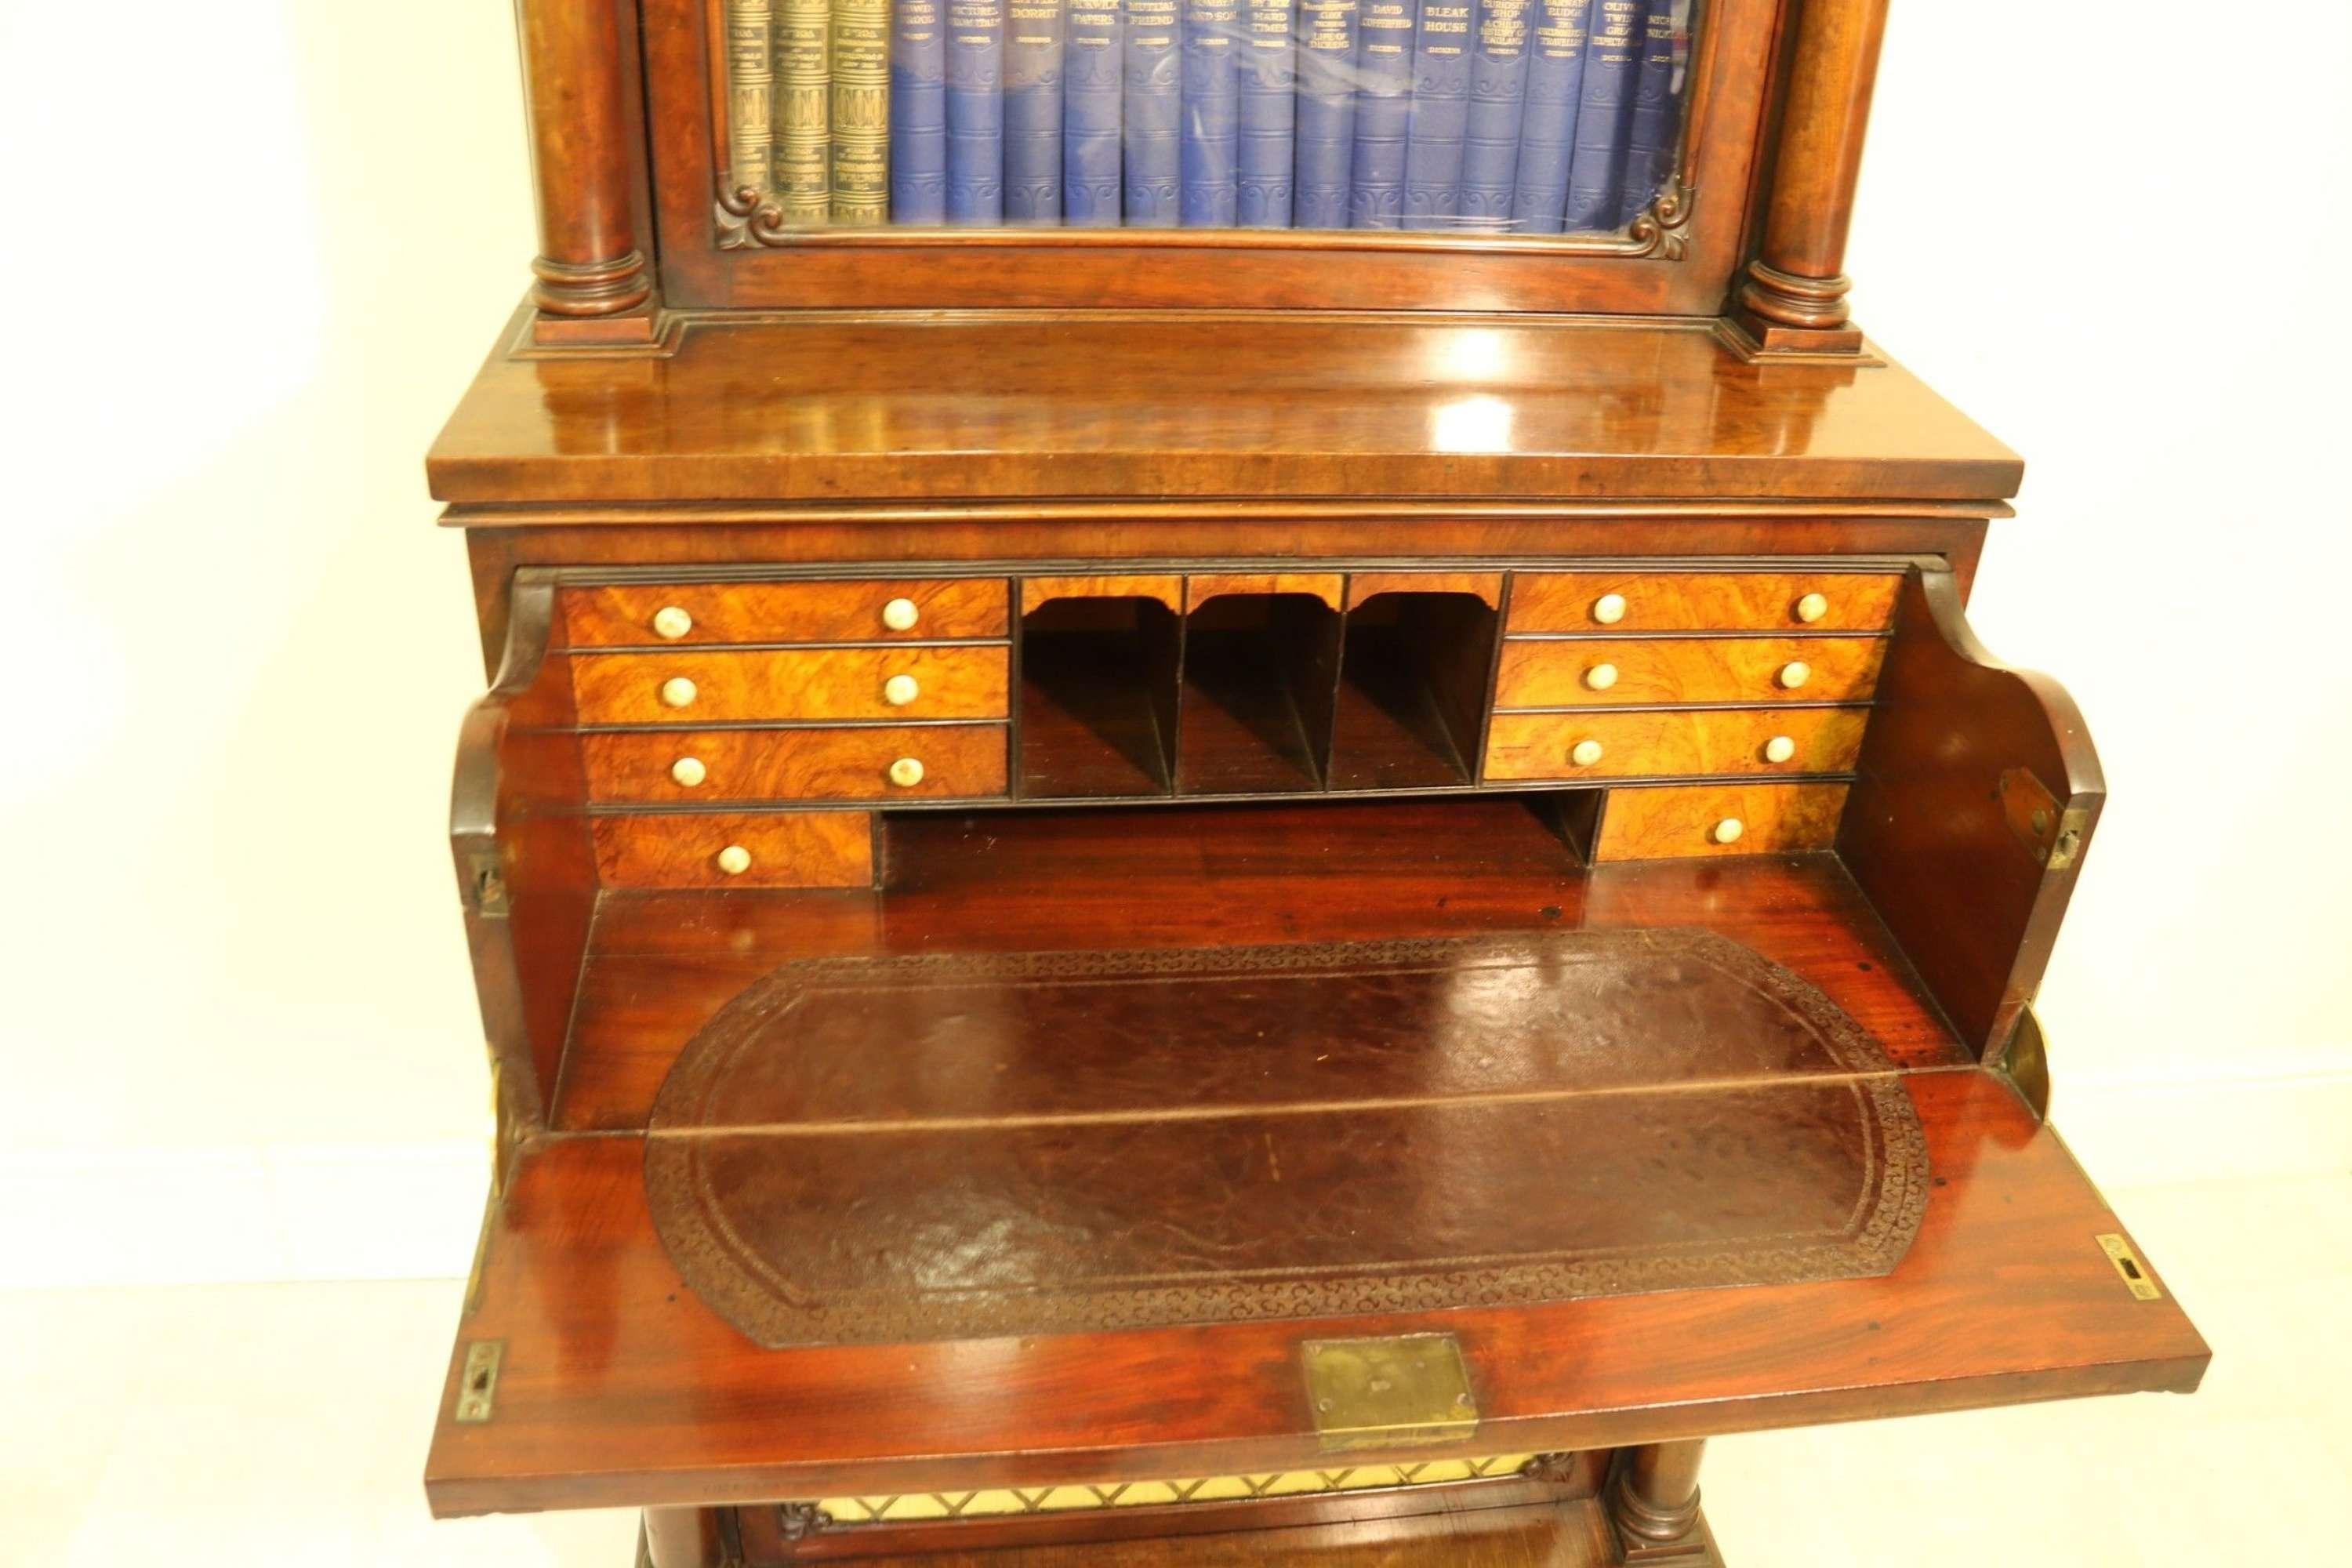 A Rare Small Regency Mahogany Secretaire Bookcase by Gillows of Lancaster

This very rare small sized figured mahogany secretaire bookcase has been beautifully made in the Regency workshops of Gillows, Lancaster, England. It is stamped Gillows